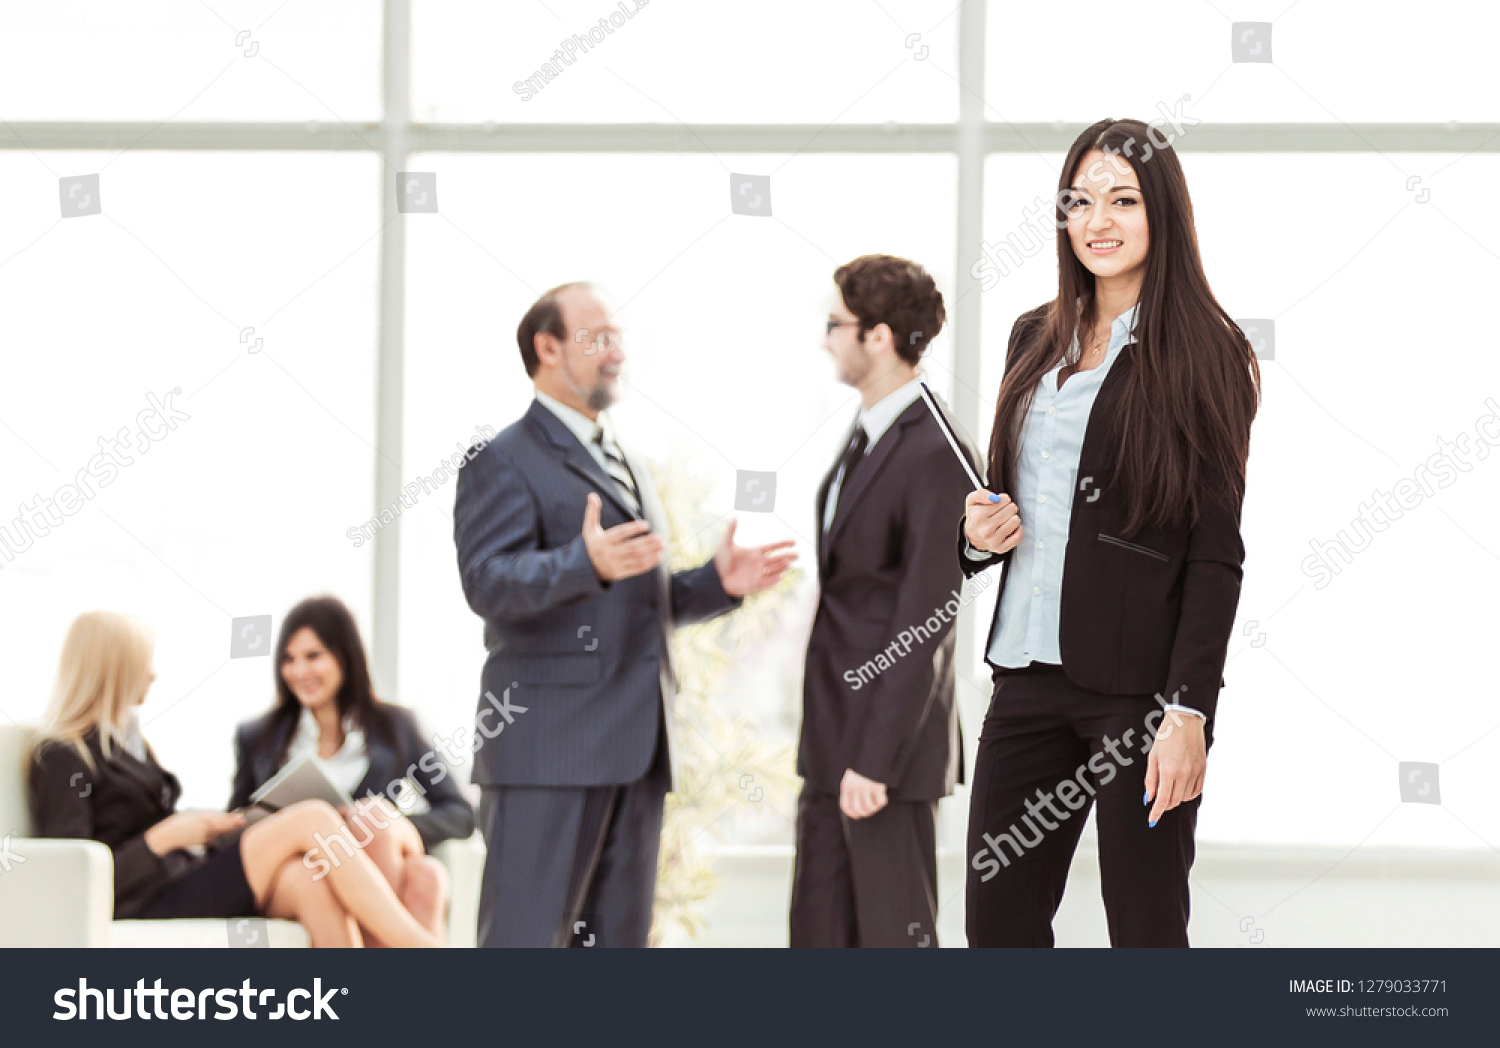 Manager of the company with documents on the background of the company's employees #1279033771